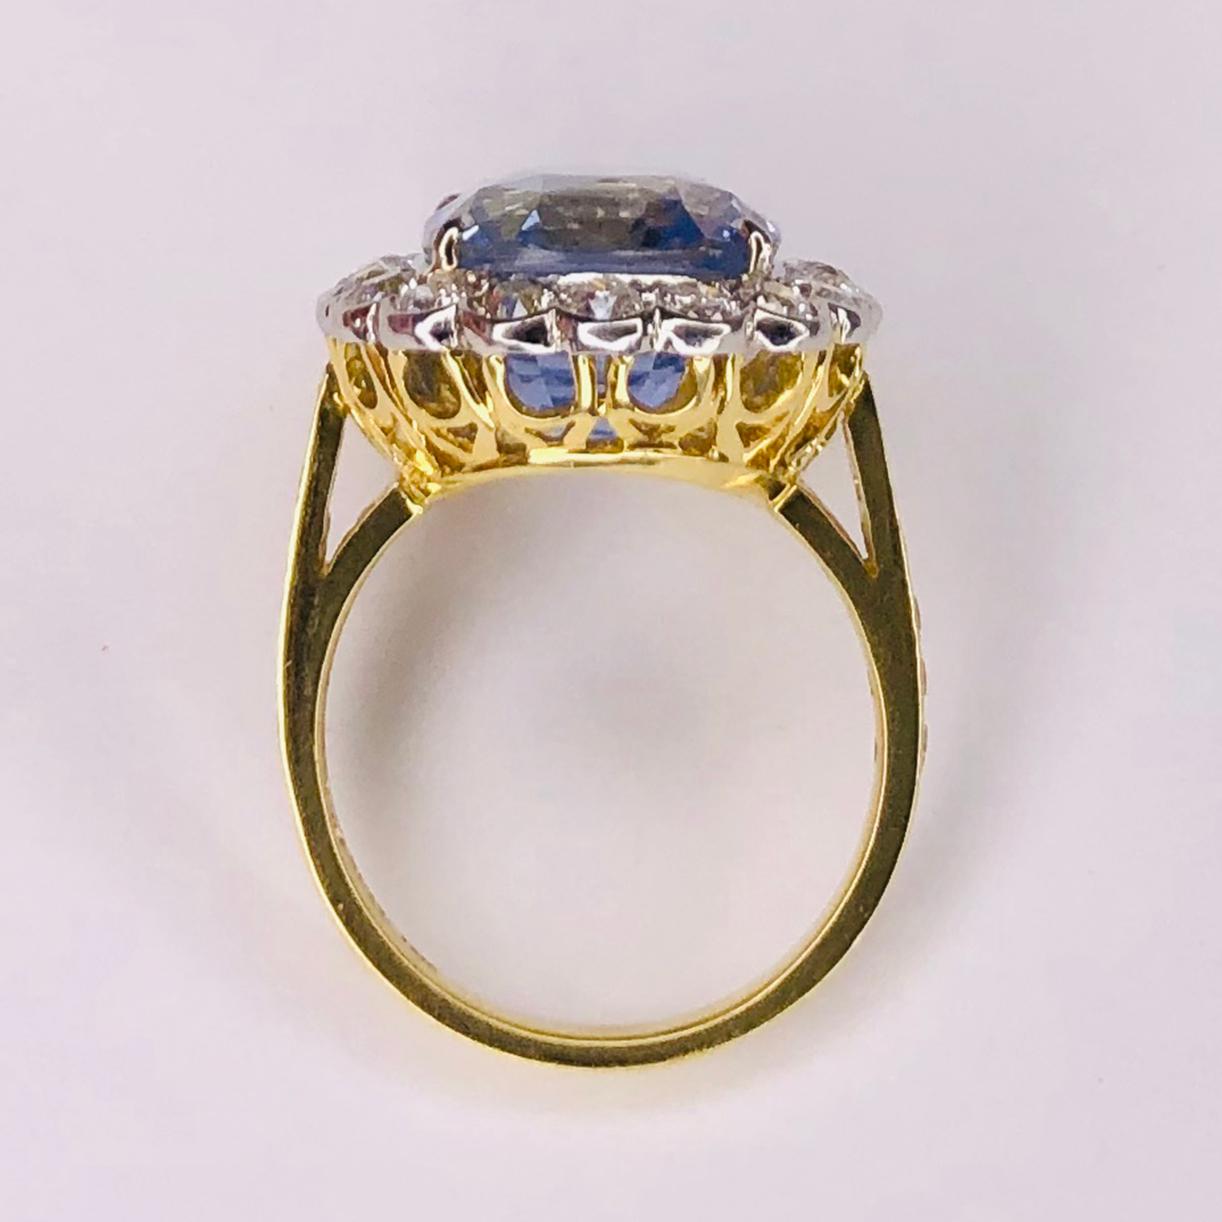 Elegant & finely detailed Vintage Ring, center set with a securely nestled 13.18 Carat Sapphire NO HEAT surrounded by 19 round Brilliant cut Diamonds weighing approx. 1.50 total Carat weight ; Hand crafted in Platinum on 18K Yellow Gold. The ring